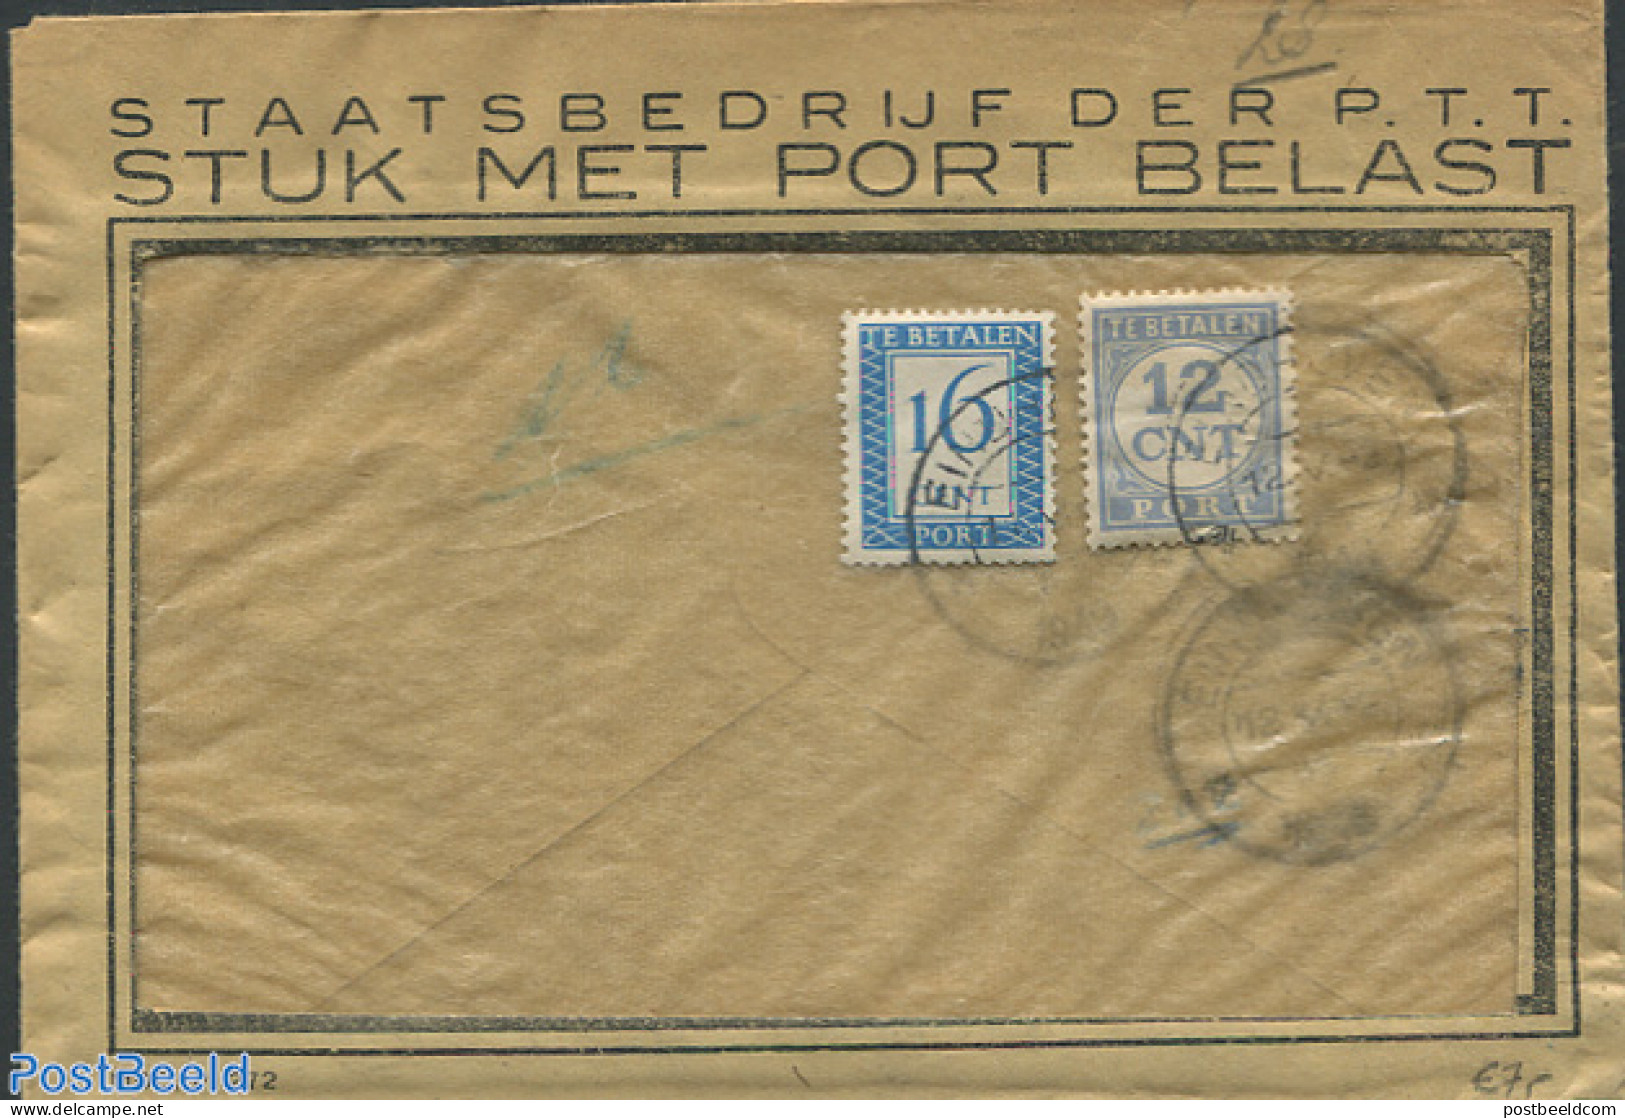 Netherlands 1948 Envelope, Postage Due 16cent And 12cent, Postal History - Covers & Documents